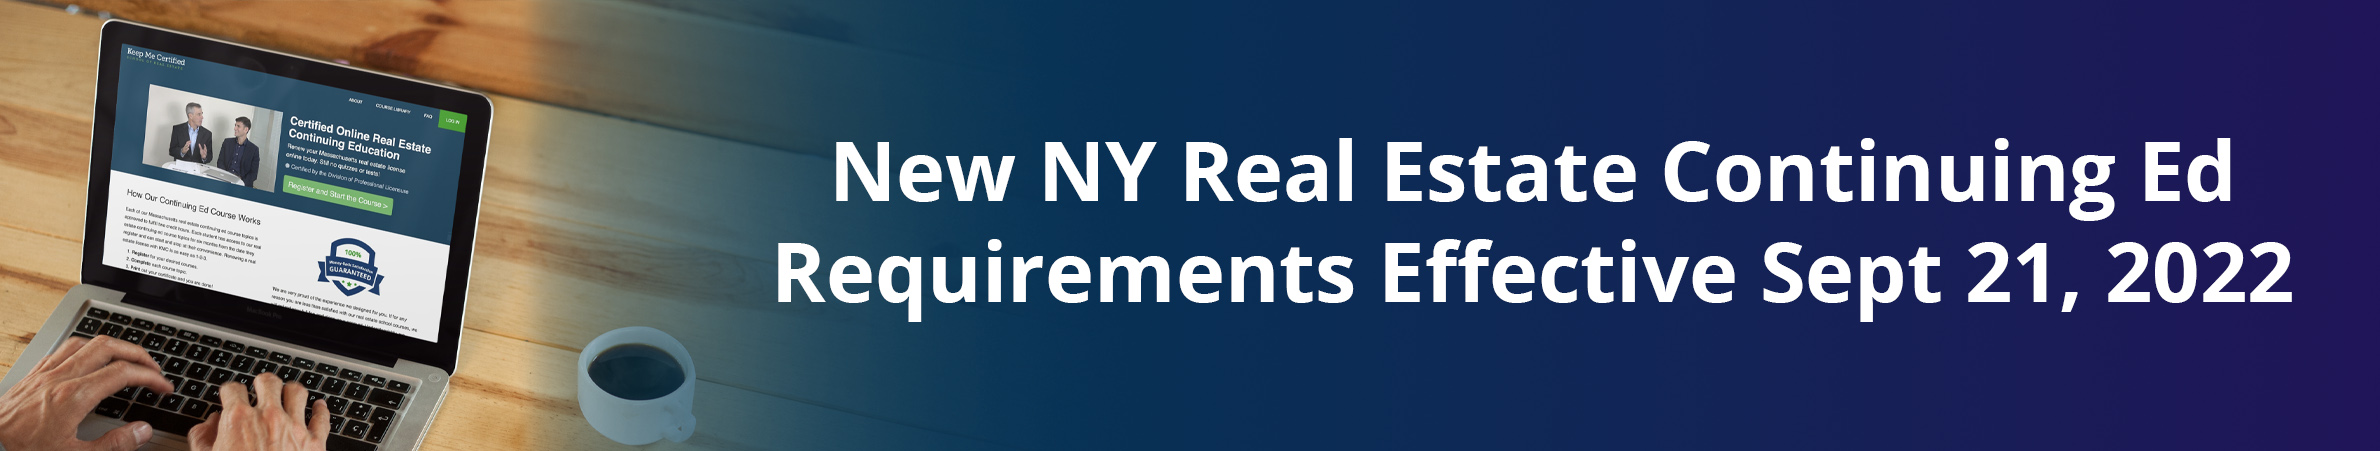 New NY Real estate ce requirements